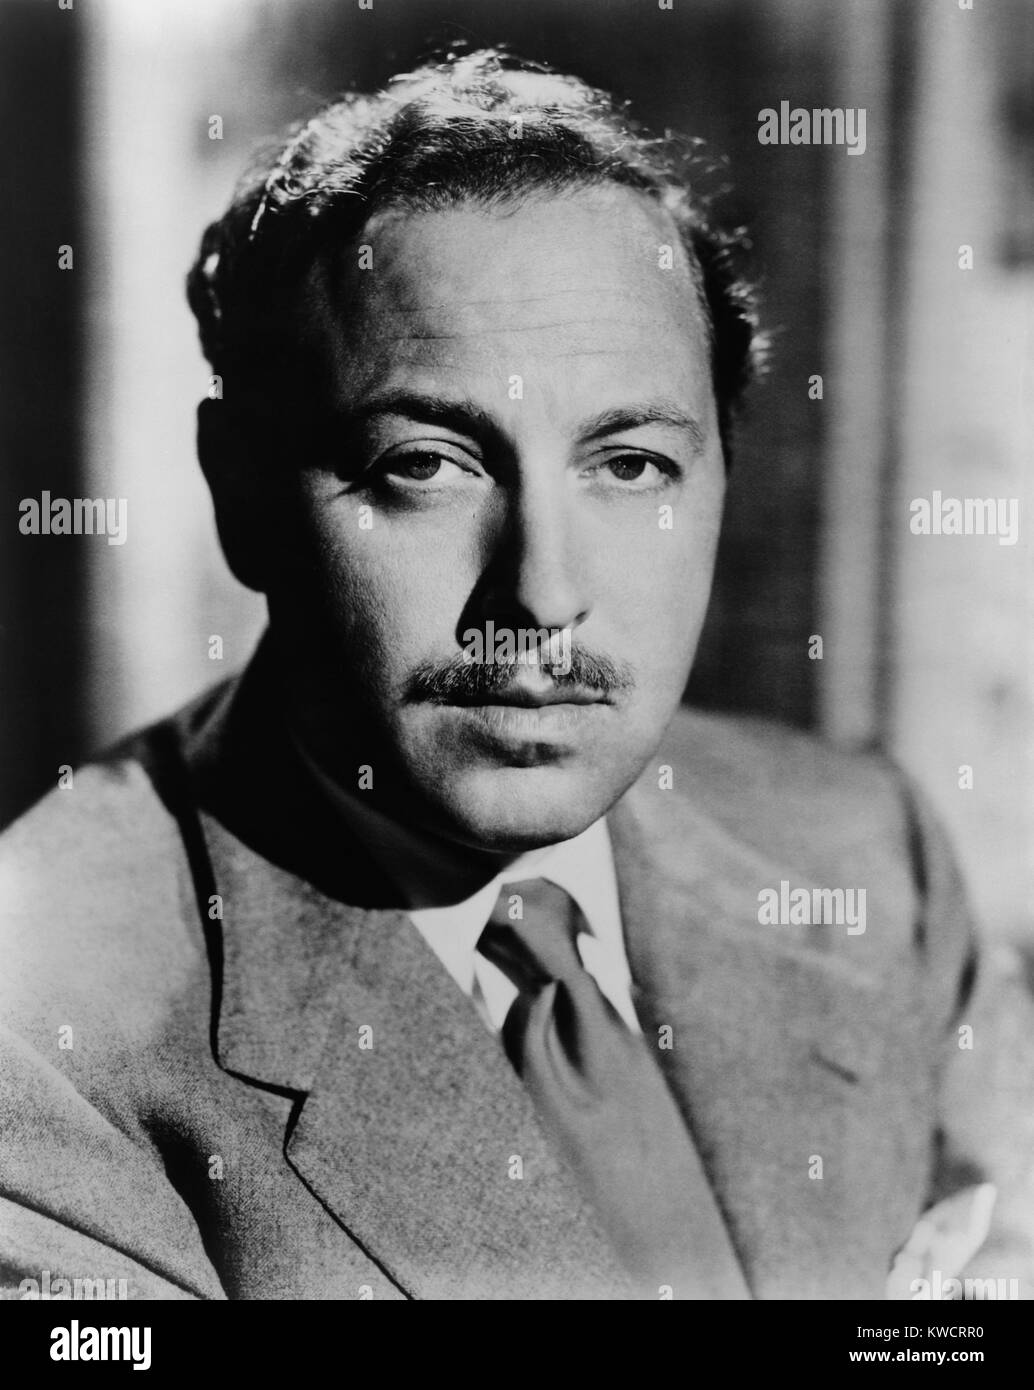 Tennessee Williams, playwright of 20th century American classics in 1952. His works include: The Glass Menagerie; A Streetcar Named Desire; Cat on a Hot Tin Roof; Orpheus Descending; Sweet Bird of Youth; The Rose Tattoo; Orpheus Descending; The Night of the Iguana; Summer and Smoke. - (BSLOC 2015 1 31) Stock Photo